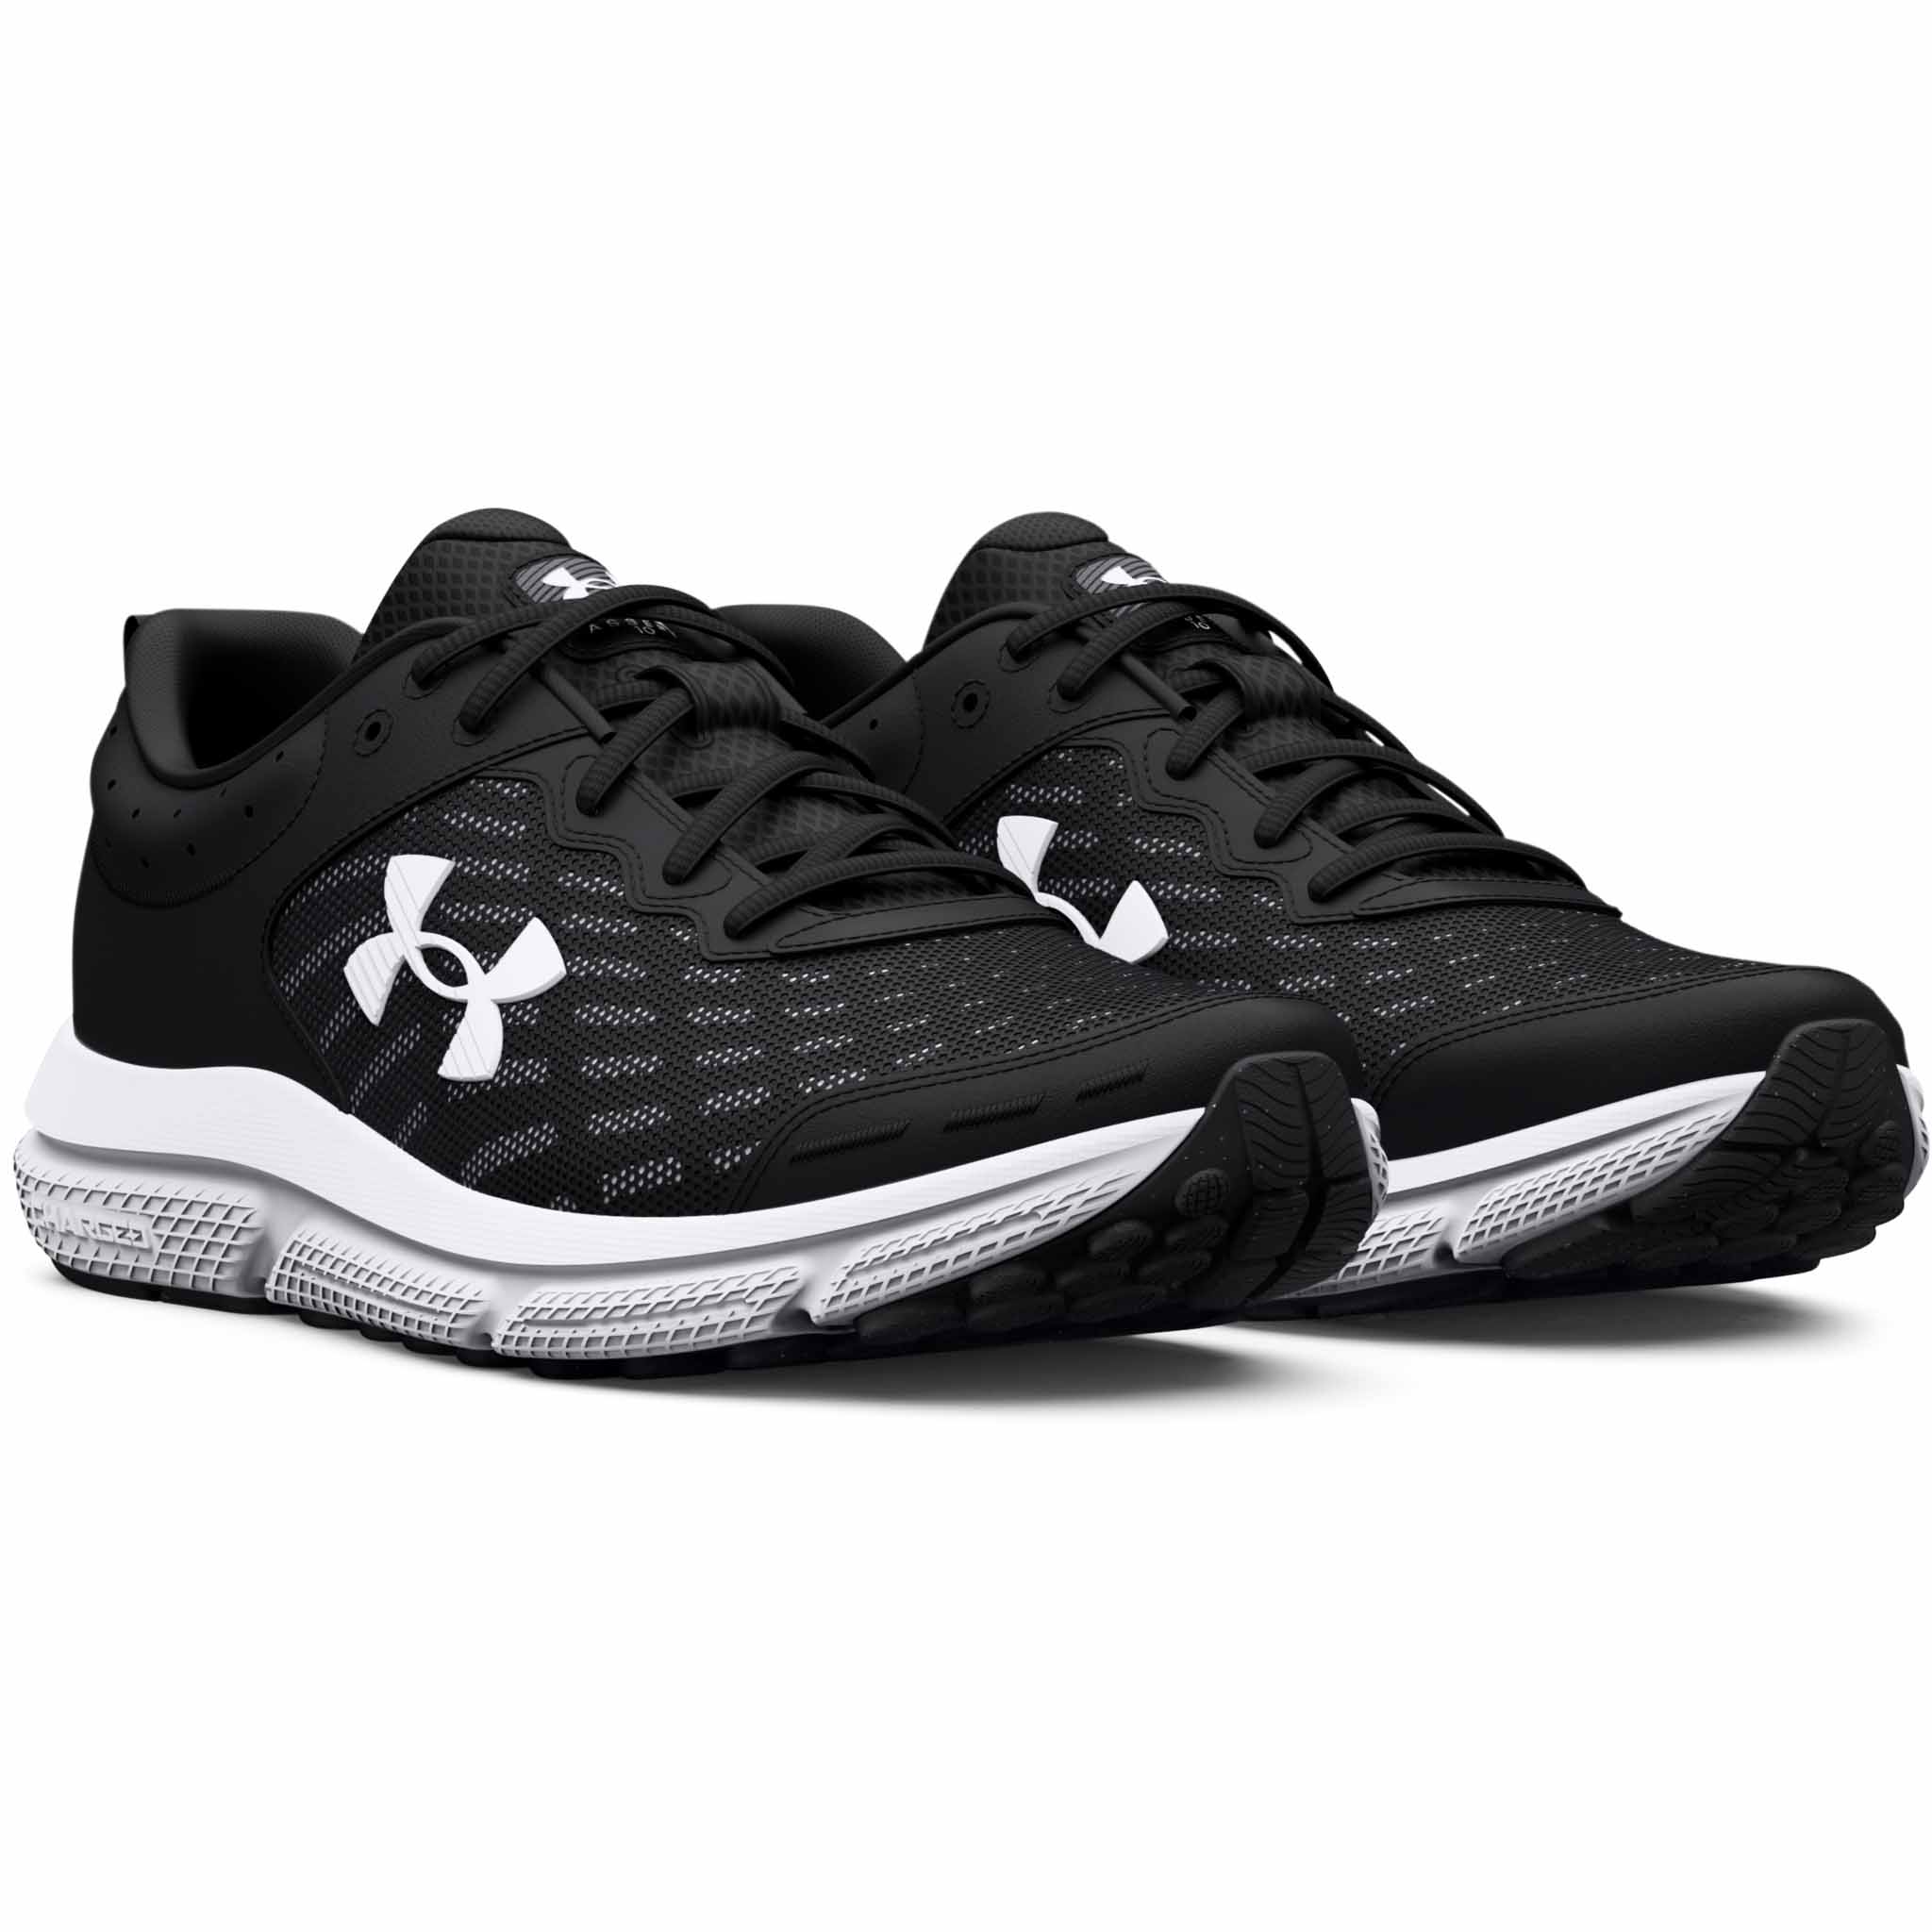 Under Armour Charged Assert 10 running shoes for men – Soccer Sport Fitness